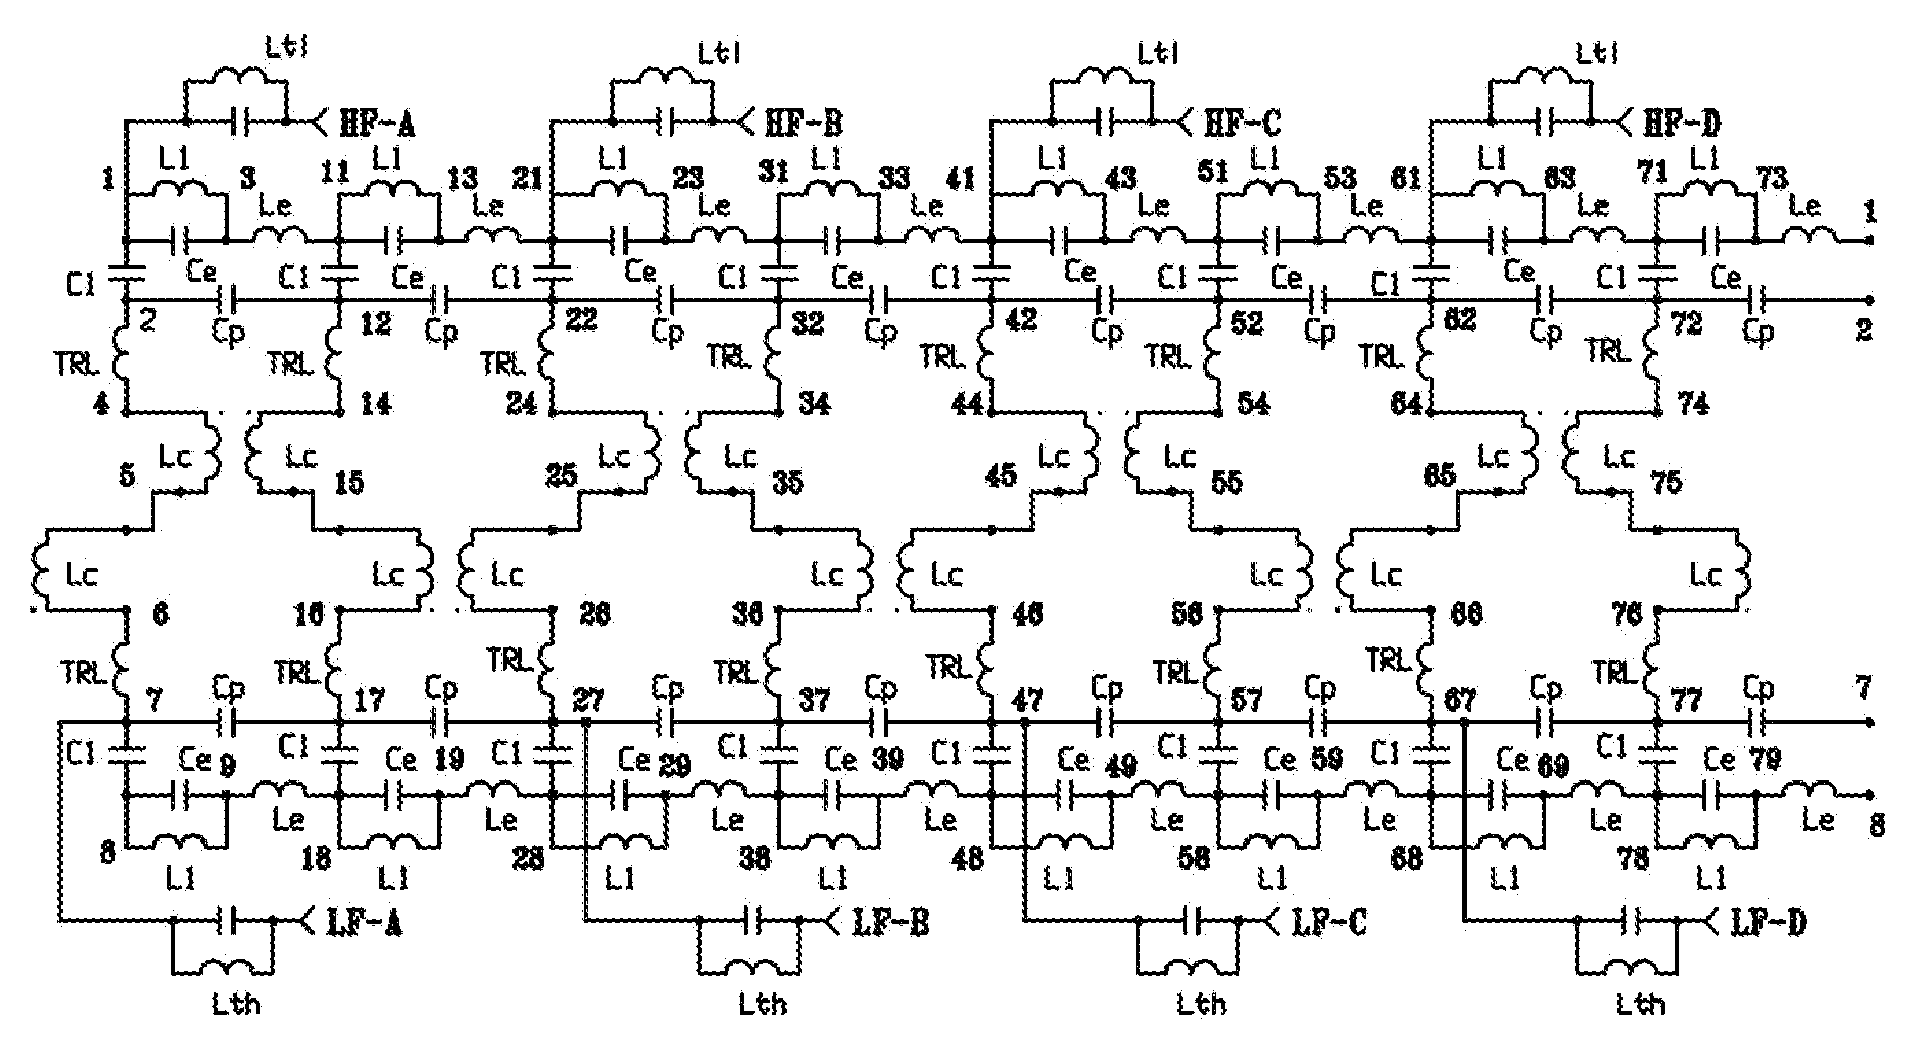 Double-balanced Double-tuned CP Birdcage with Similar Field Profiles